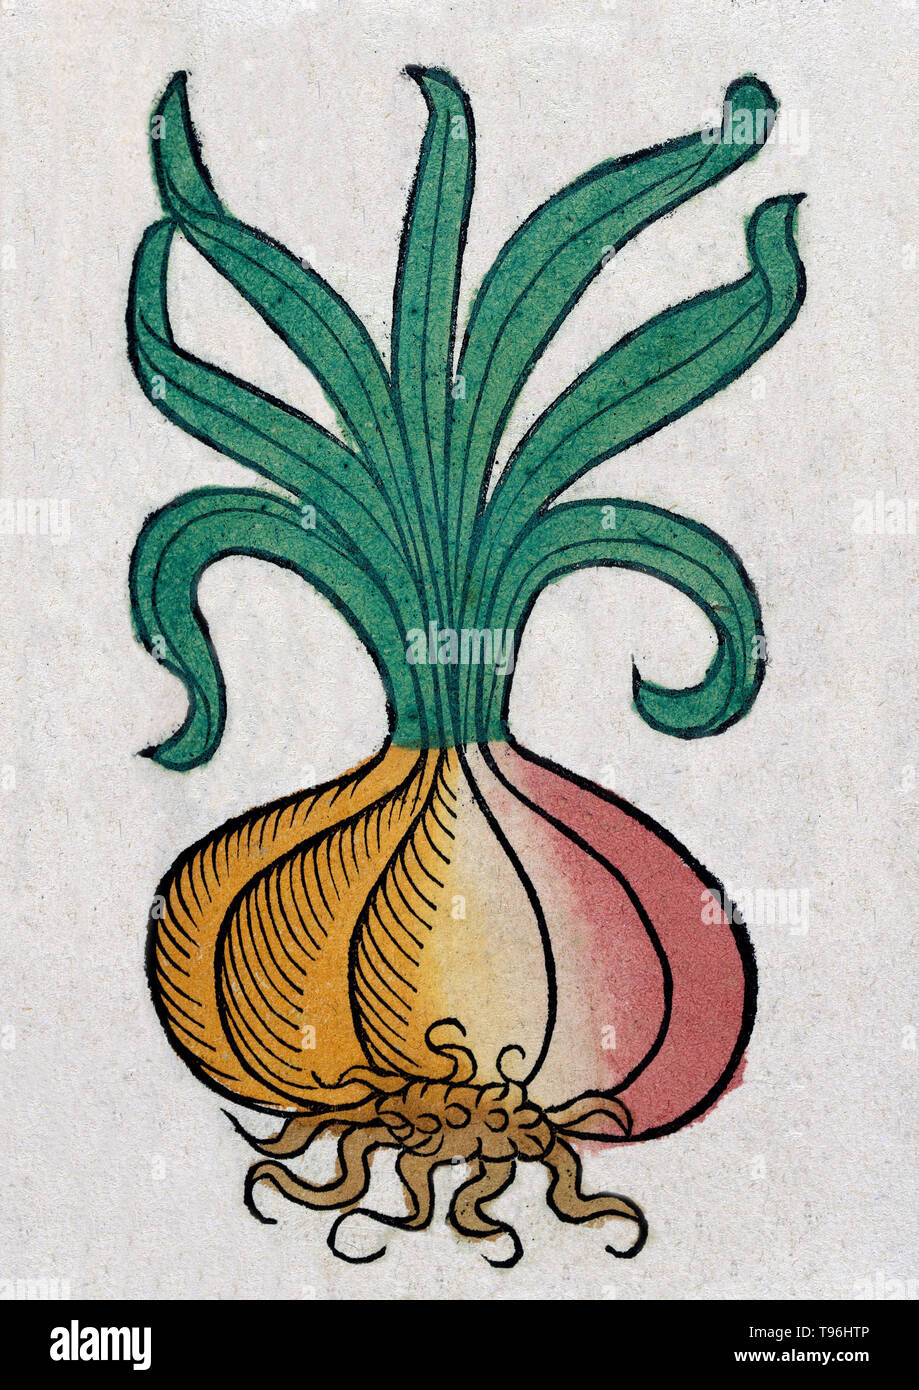 The onion is a vegetable that is the most widely cultivated species of the genus Allium. Pliny the Elder documented Roman beliefs about the onion's ability to improve ocular ailments, aid in sleep, and heal everything from oral sores and toothaches to dog bites, lumbago, and even dysentery. The Hortus Sanitatis (Garden of Health), the first natural history encyclopedia, was published by Jacob Meydenbach in Germany, 1491. Stock Photo